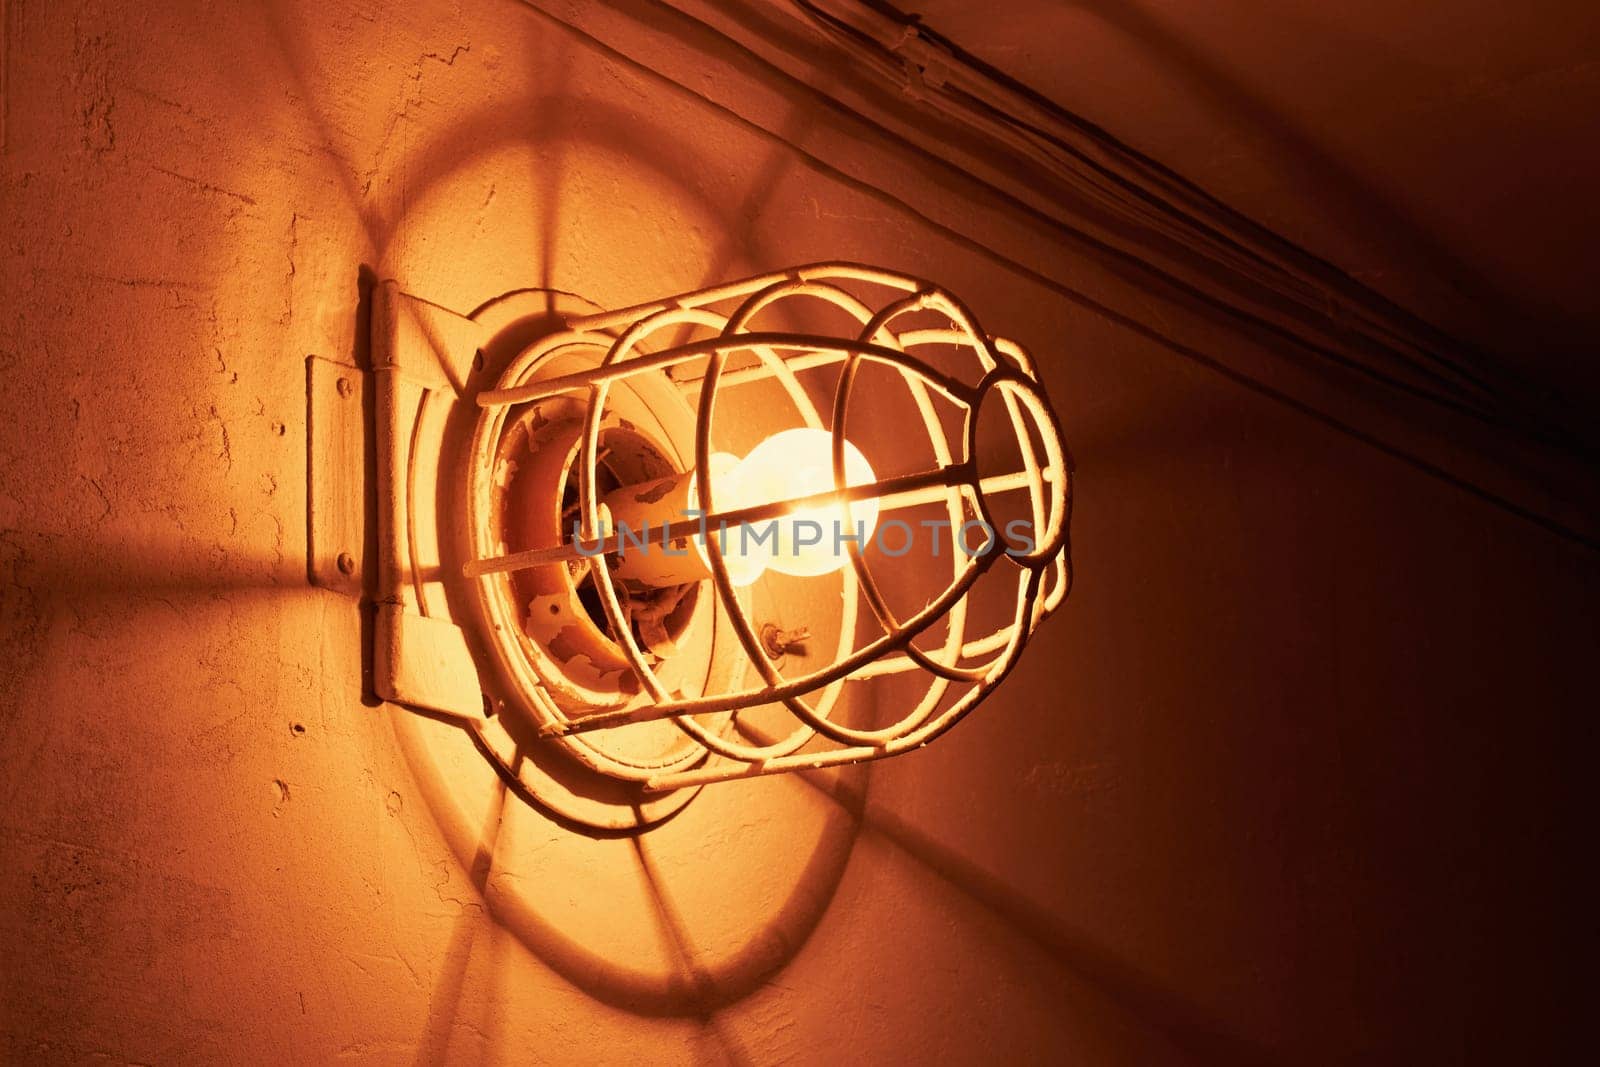 Luminous incandescent lamp. Old electric light bulb with a metal grate on the wall